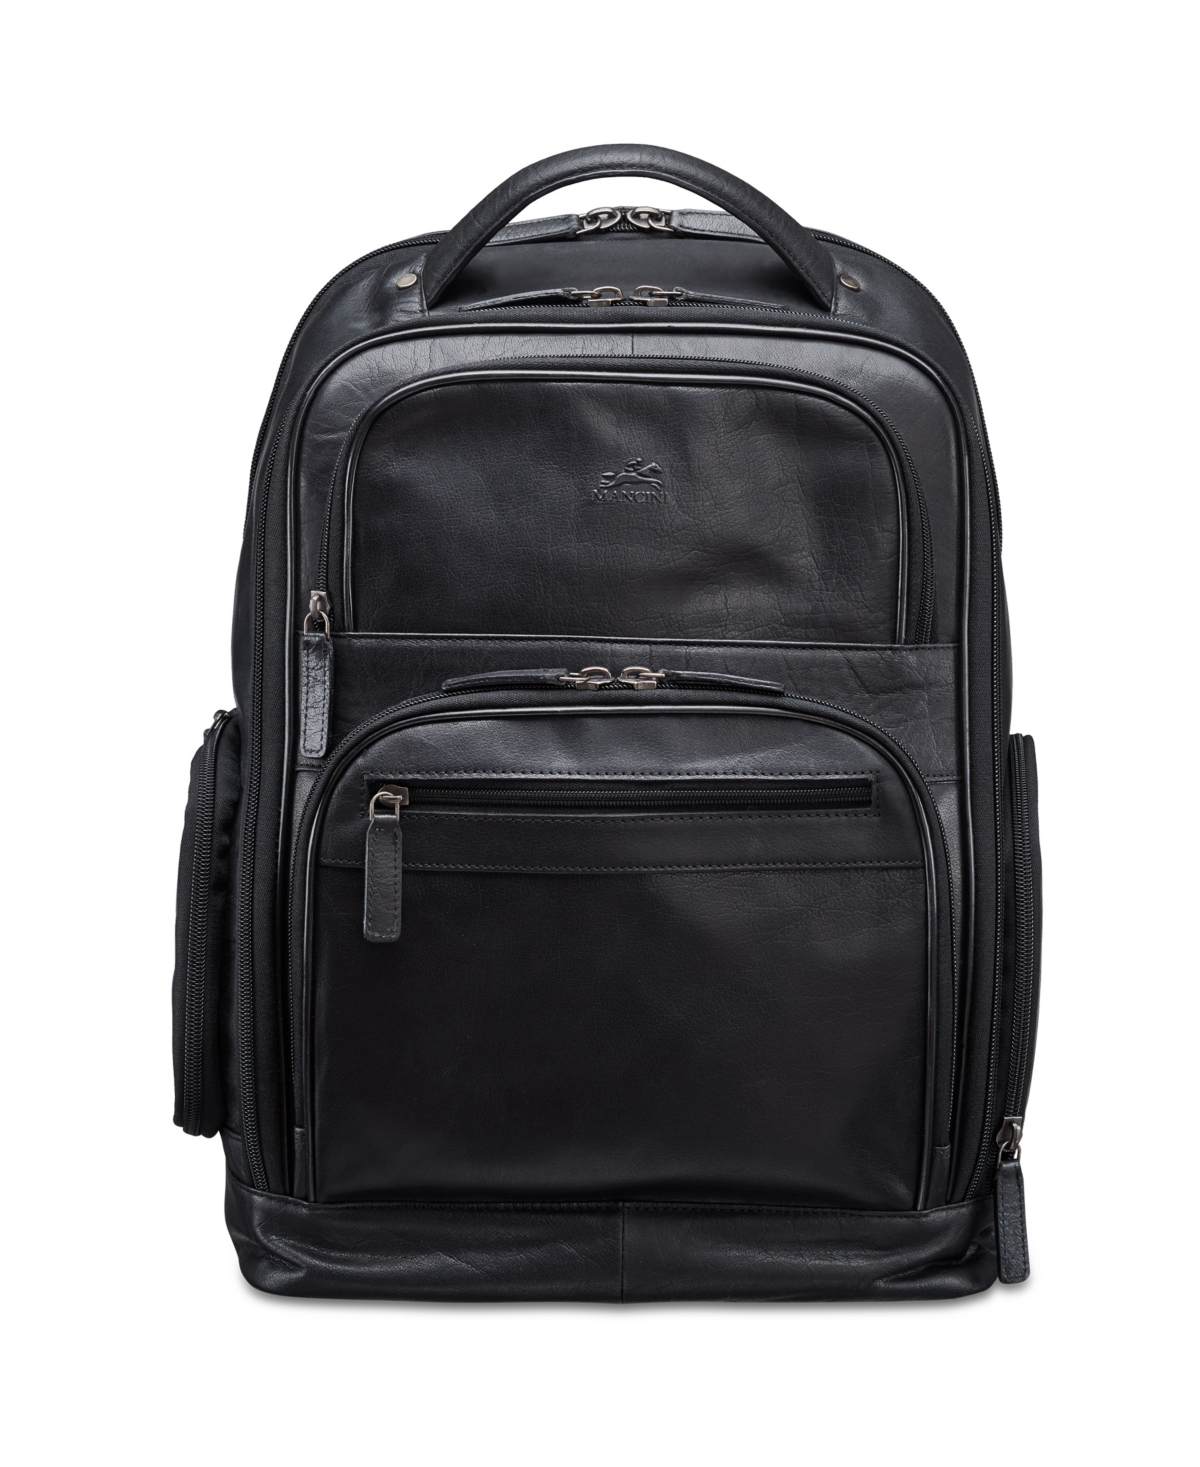 Mancini Buffalo Collection Laptop/ Tablet Backpack